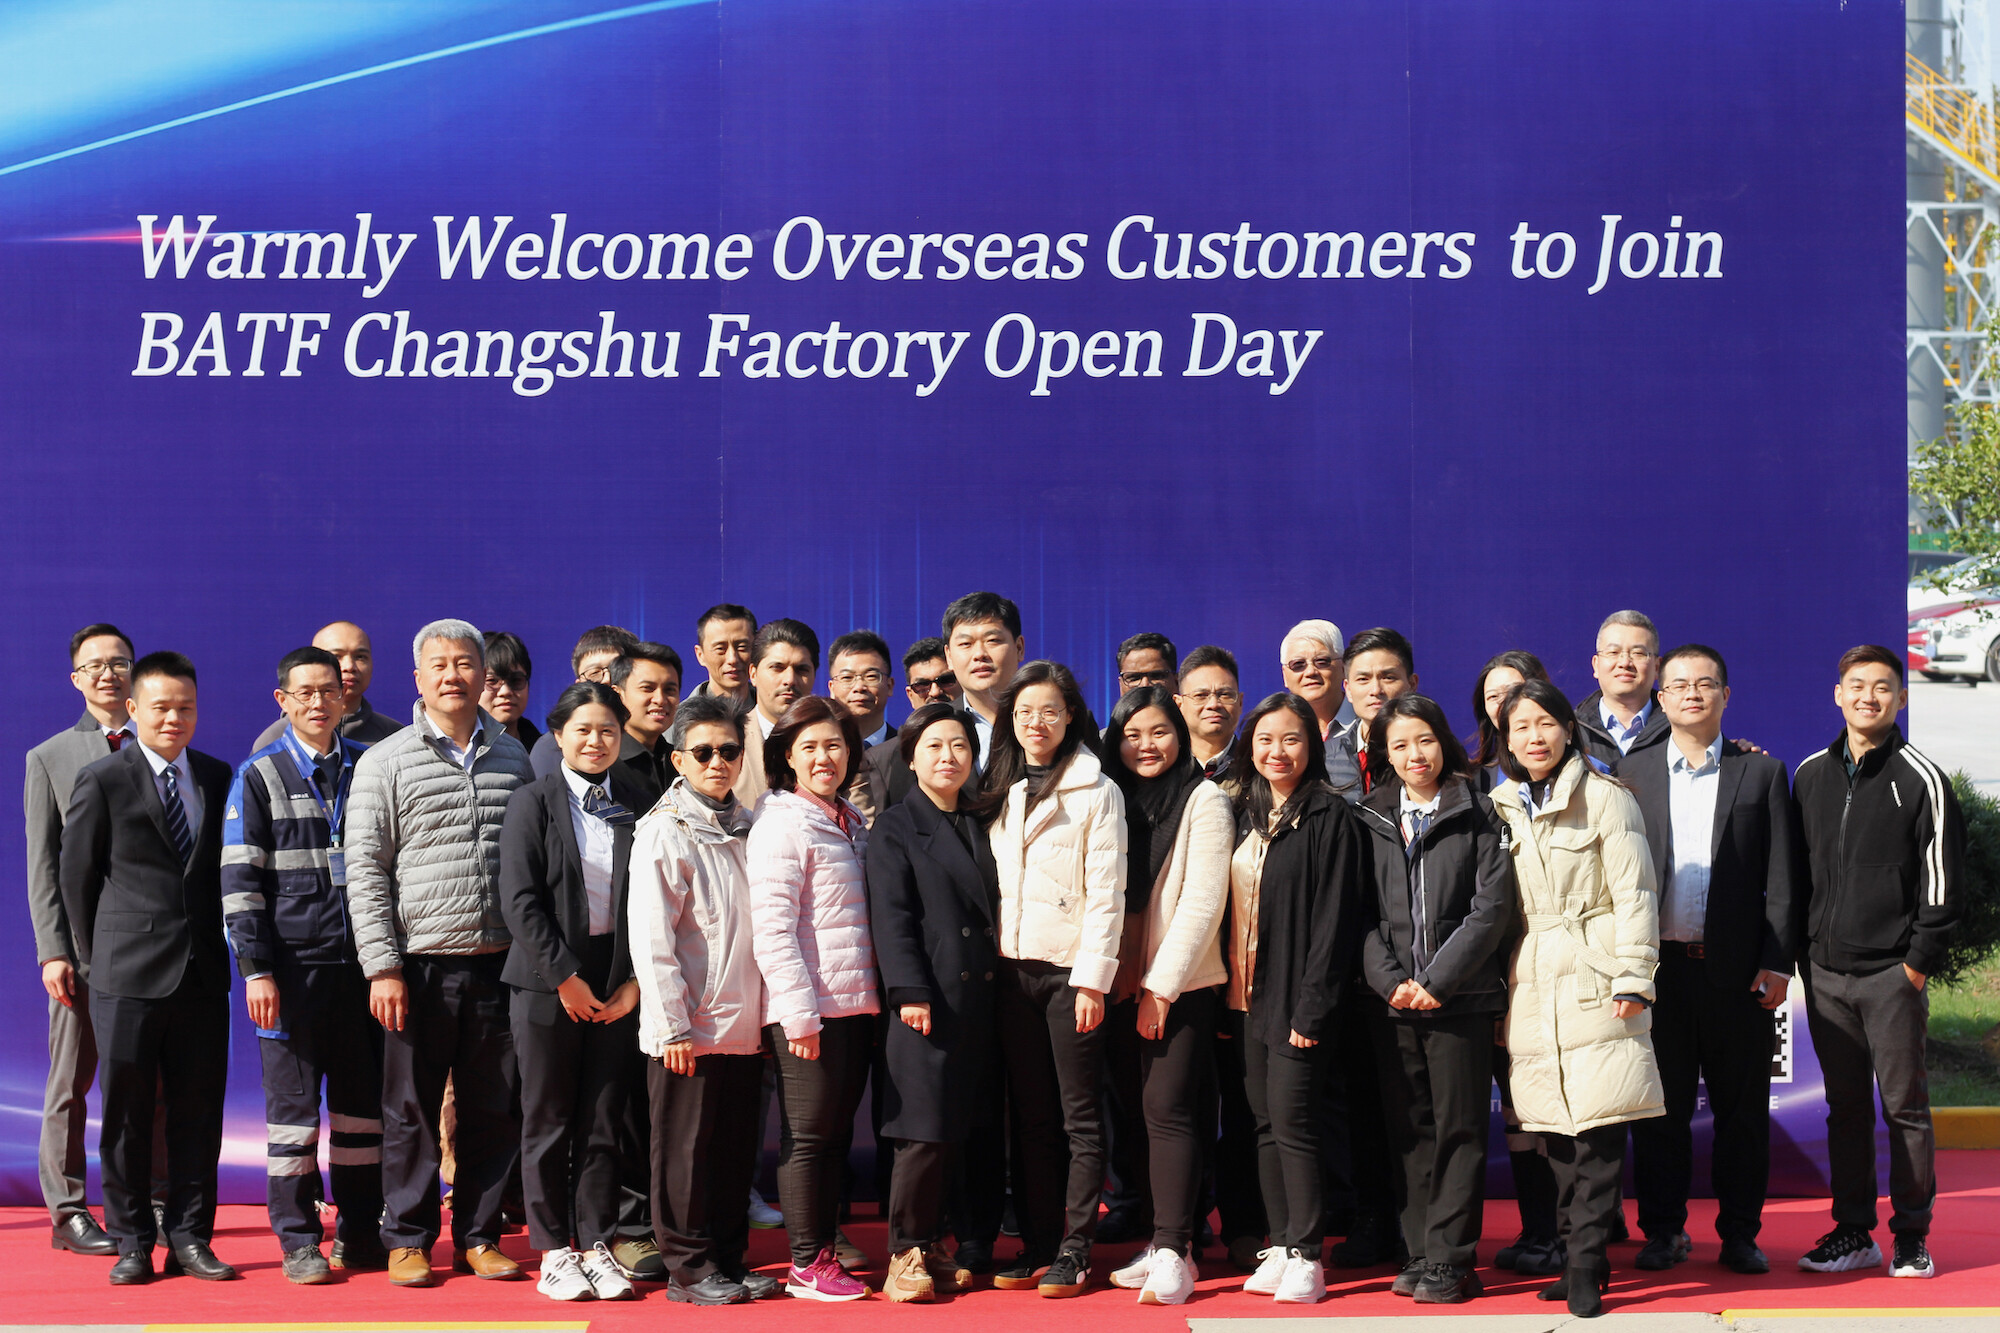 Successful Hosting of BATF Group's First Overseas Customer Open Day Event